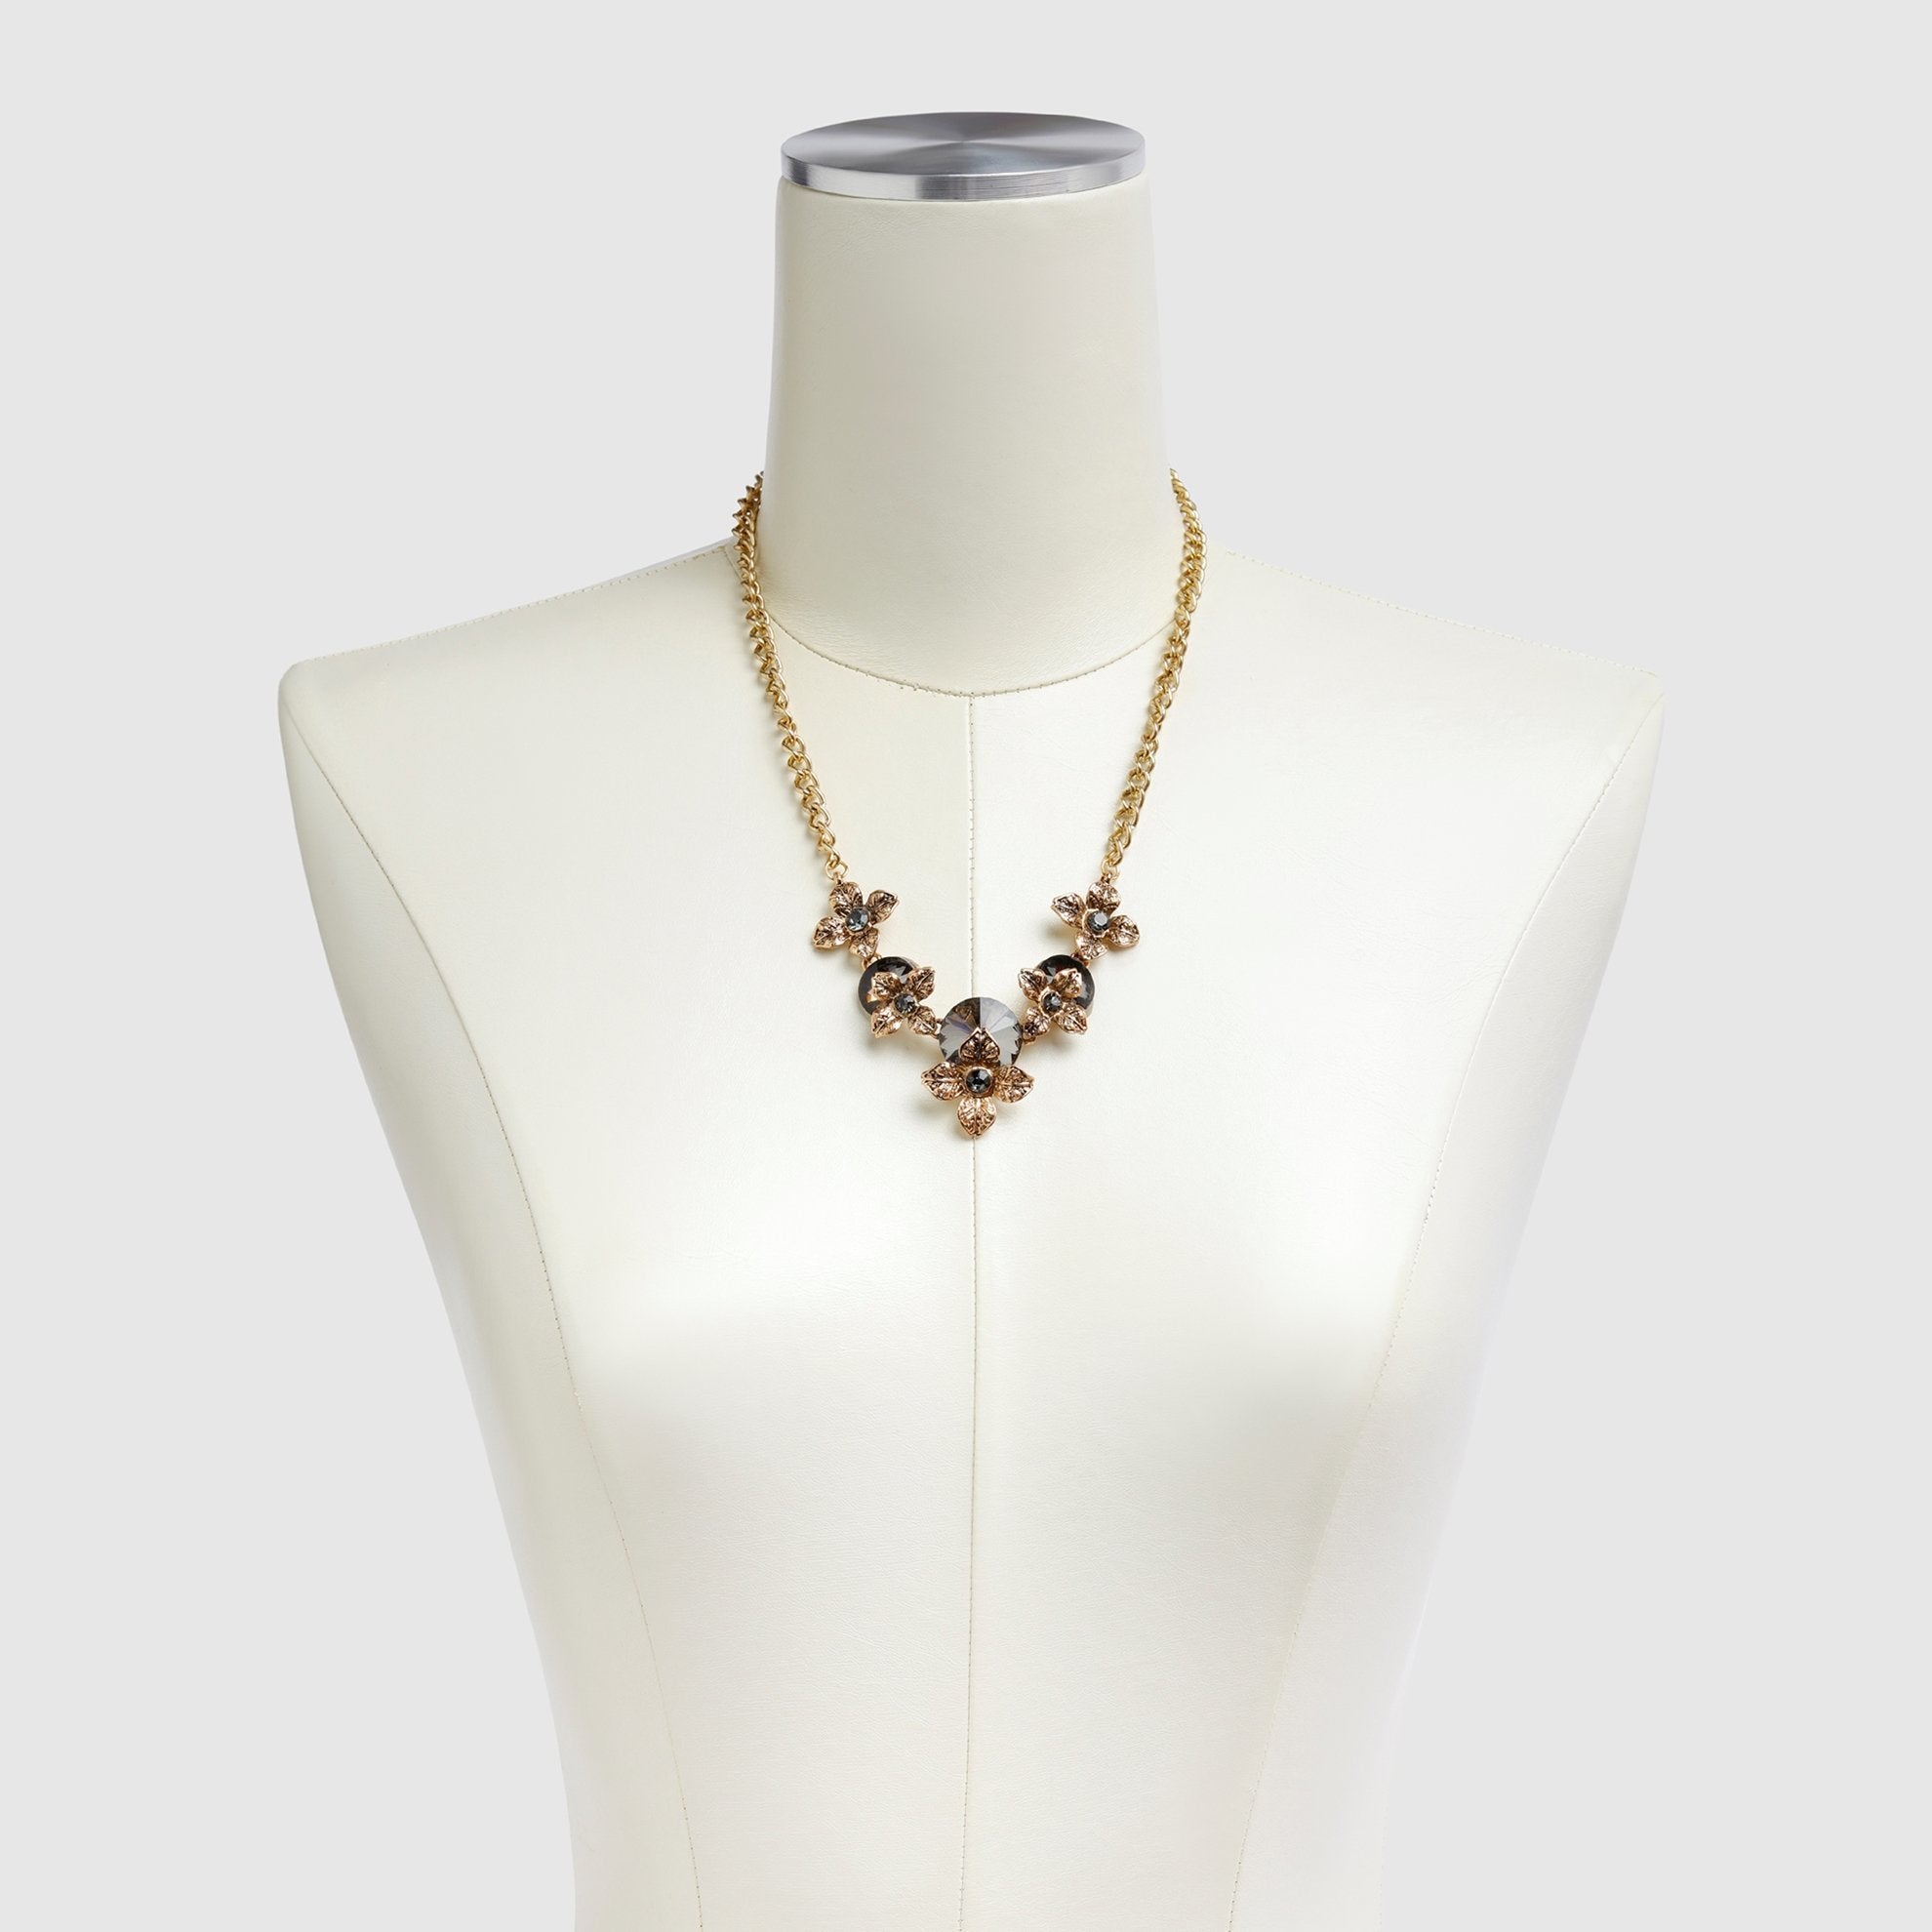 Chic Floral Necklace on Dress Form